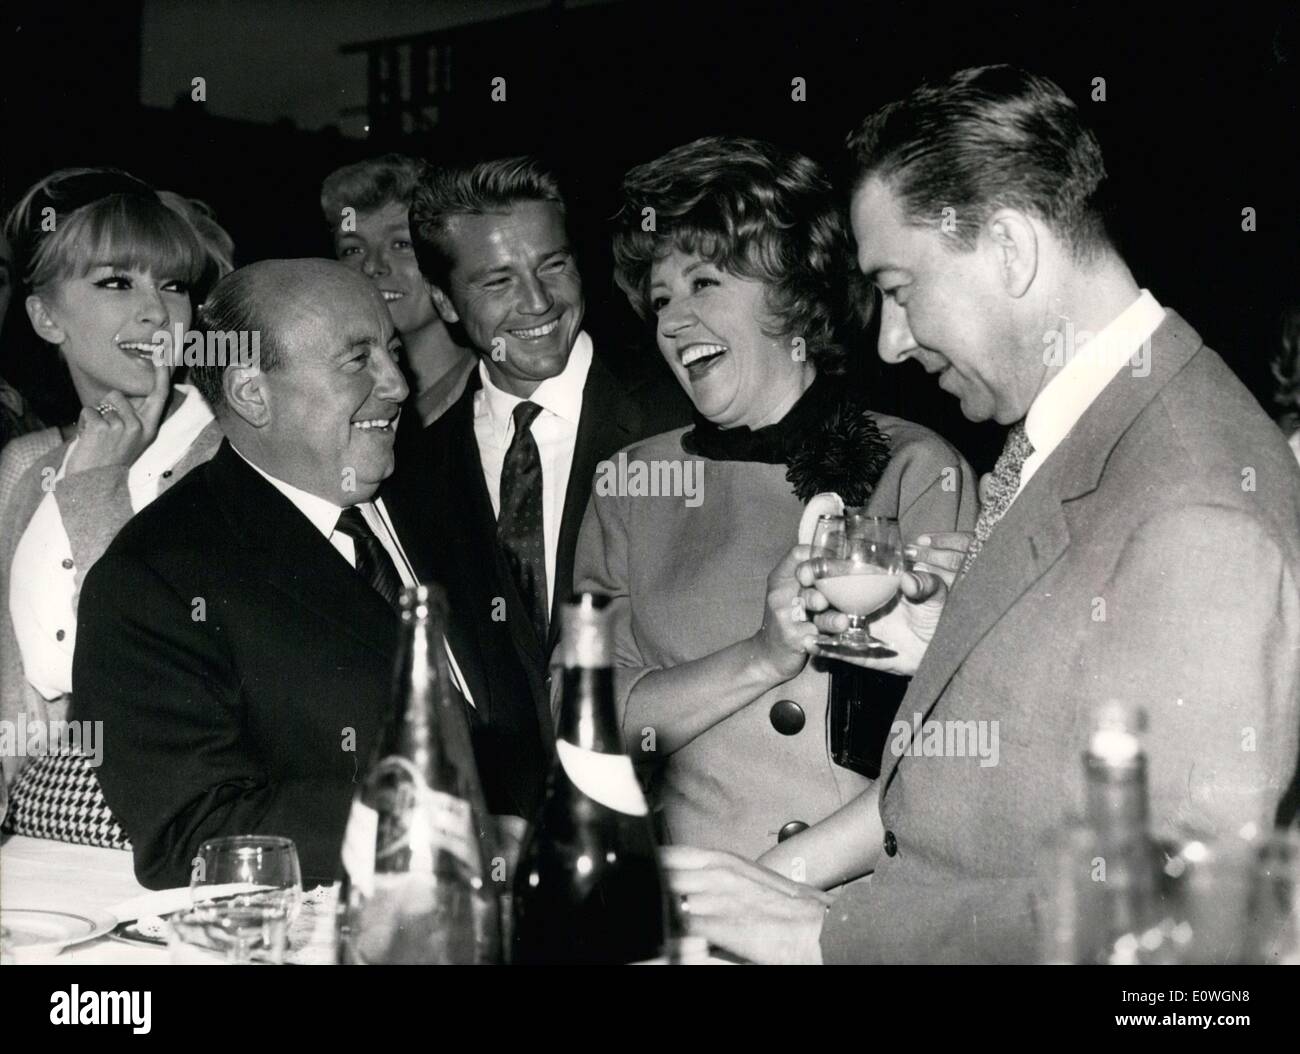 Sep. 14, 1962 - Director Marcel Carne just started filming his new movie ''Chicken Feed for Little Birds''. He is returning to comical movies for the first time in 25 years. Carne is pictured here with some of his principal actors at a reception given at Epinay Studio to celebrate his starting filming. Stock Photo